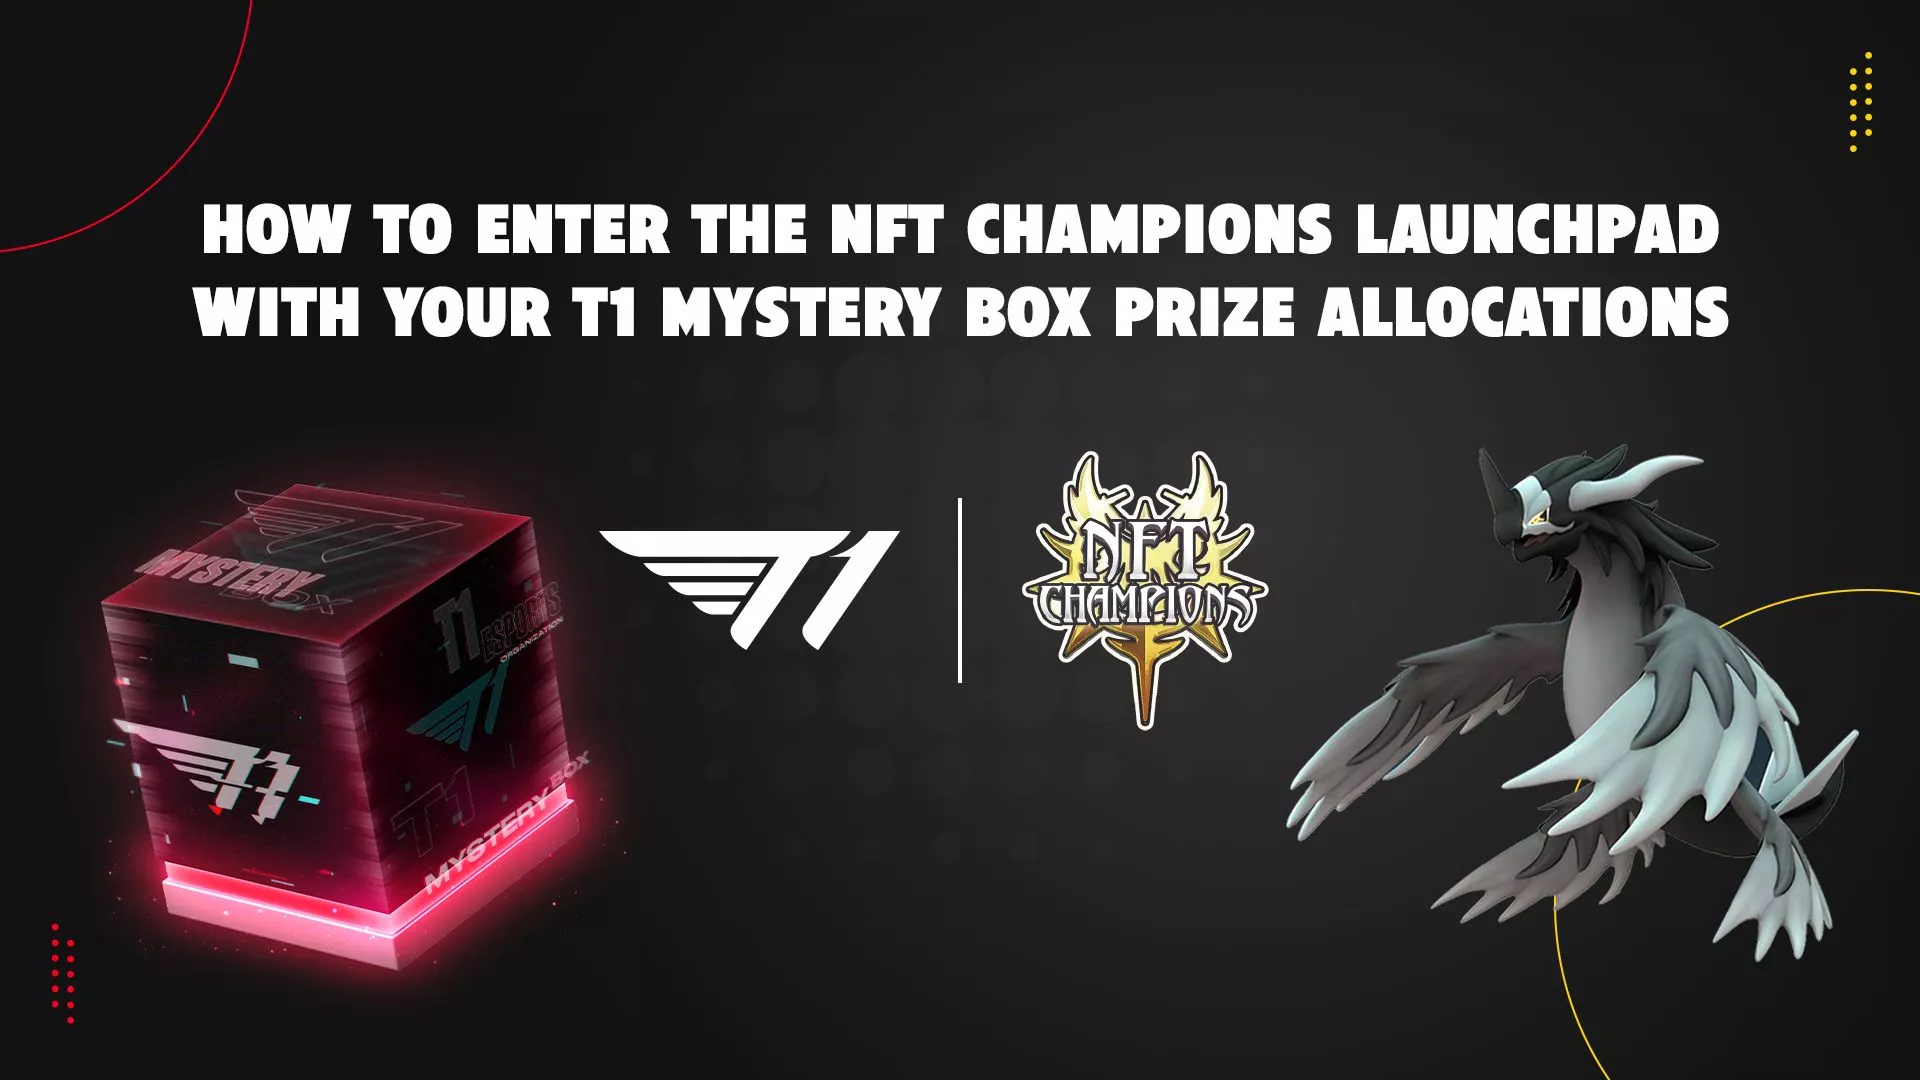 How to Enter the NFT Champions Launchpad With Your T1 Mystery Box Prize Allocations